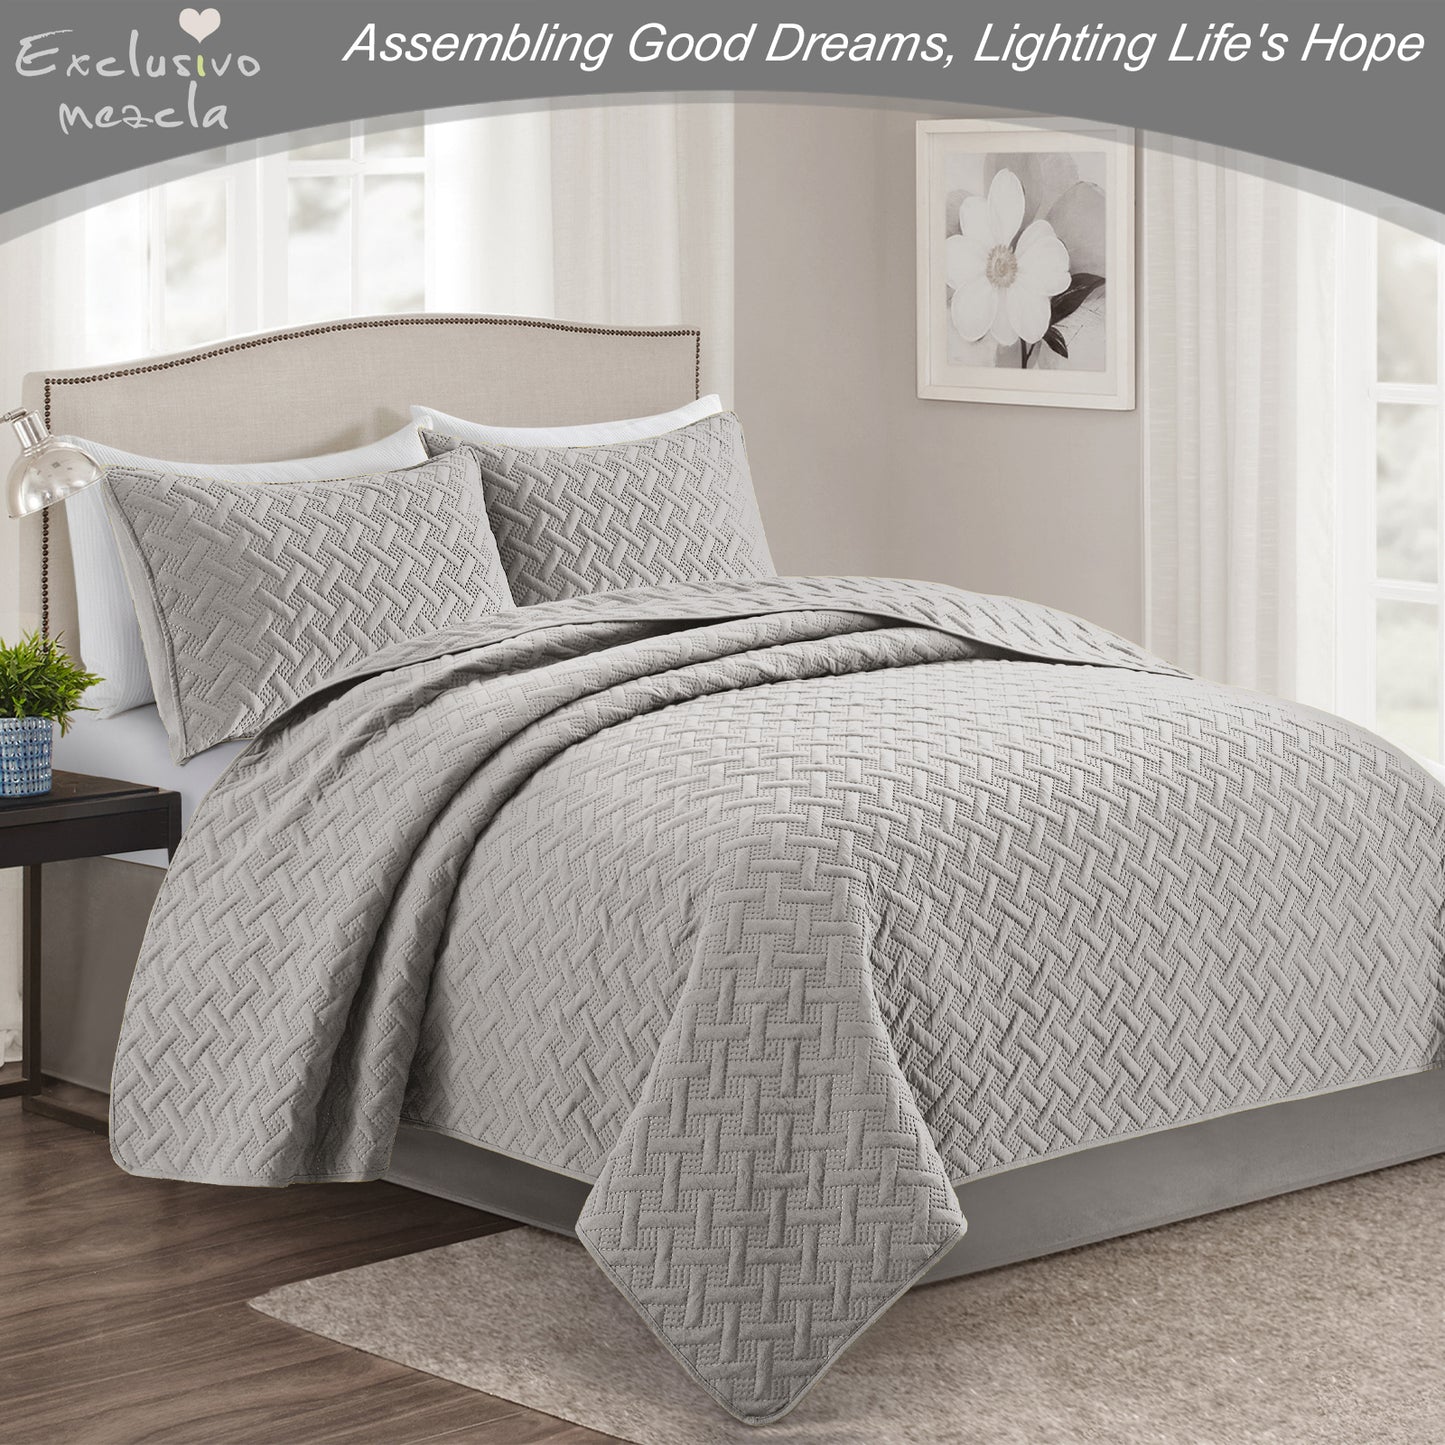 Exclusivo Mezcla 2-Piece Light Gray Twin Size Quilt Set, Weave Pattern Ultrasonic Lightweight and Soft Quilts/Bedspreads/Coverlets/Bedding Set (1 Quilt, 1 Pillow Sham) for All Seasons